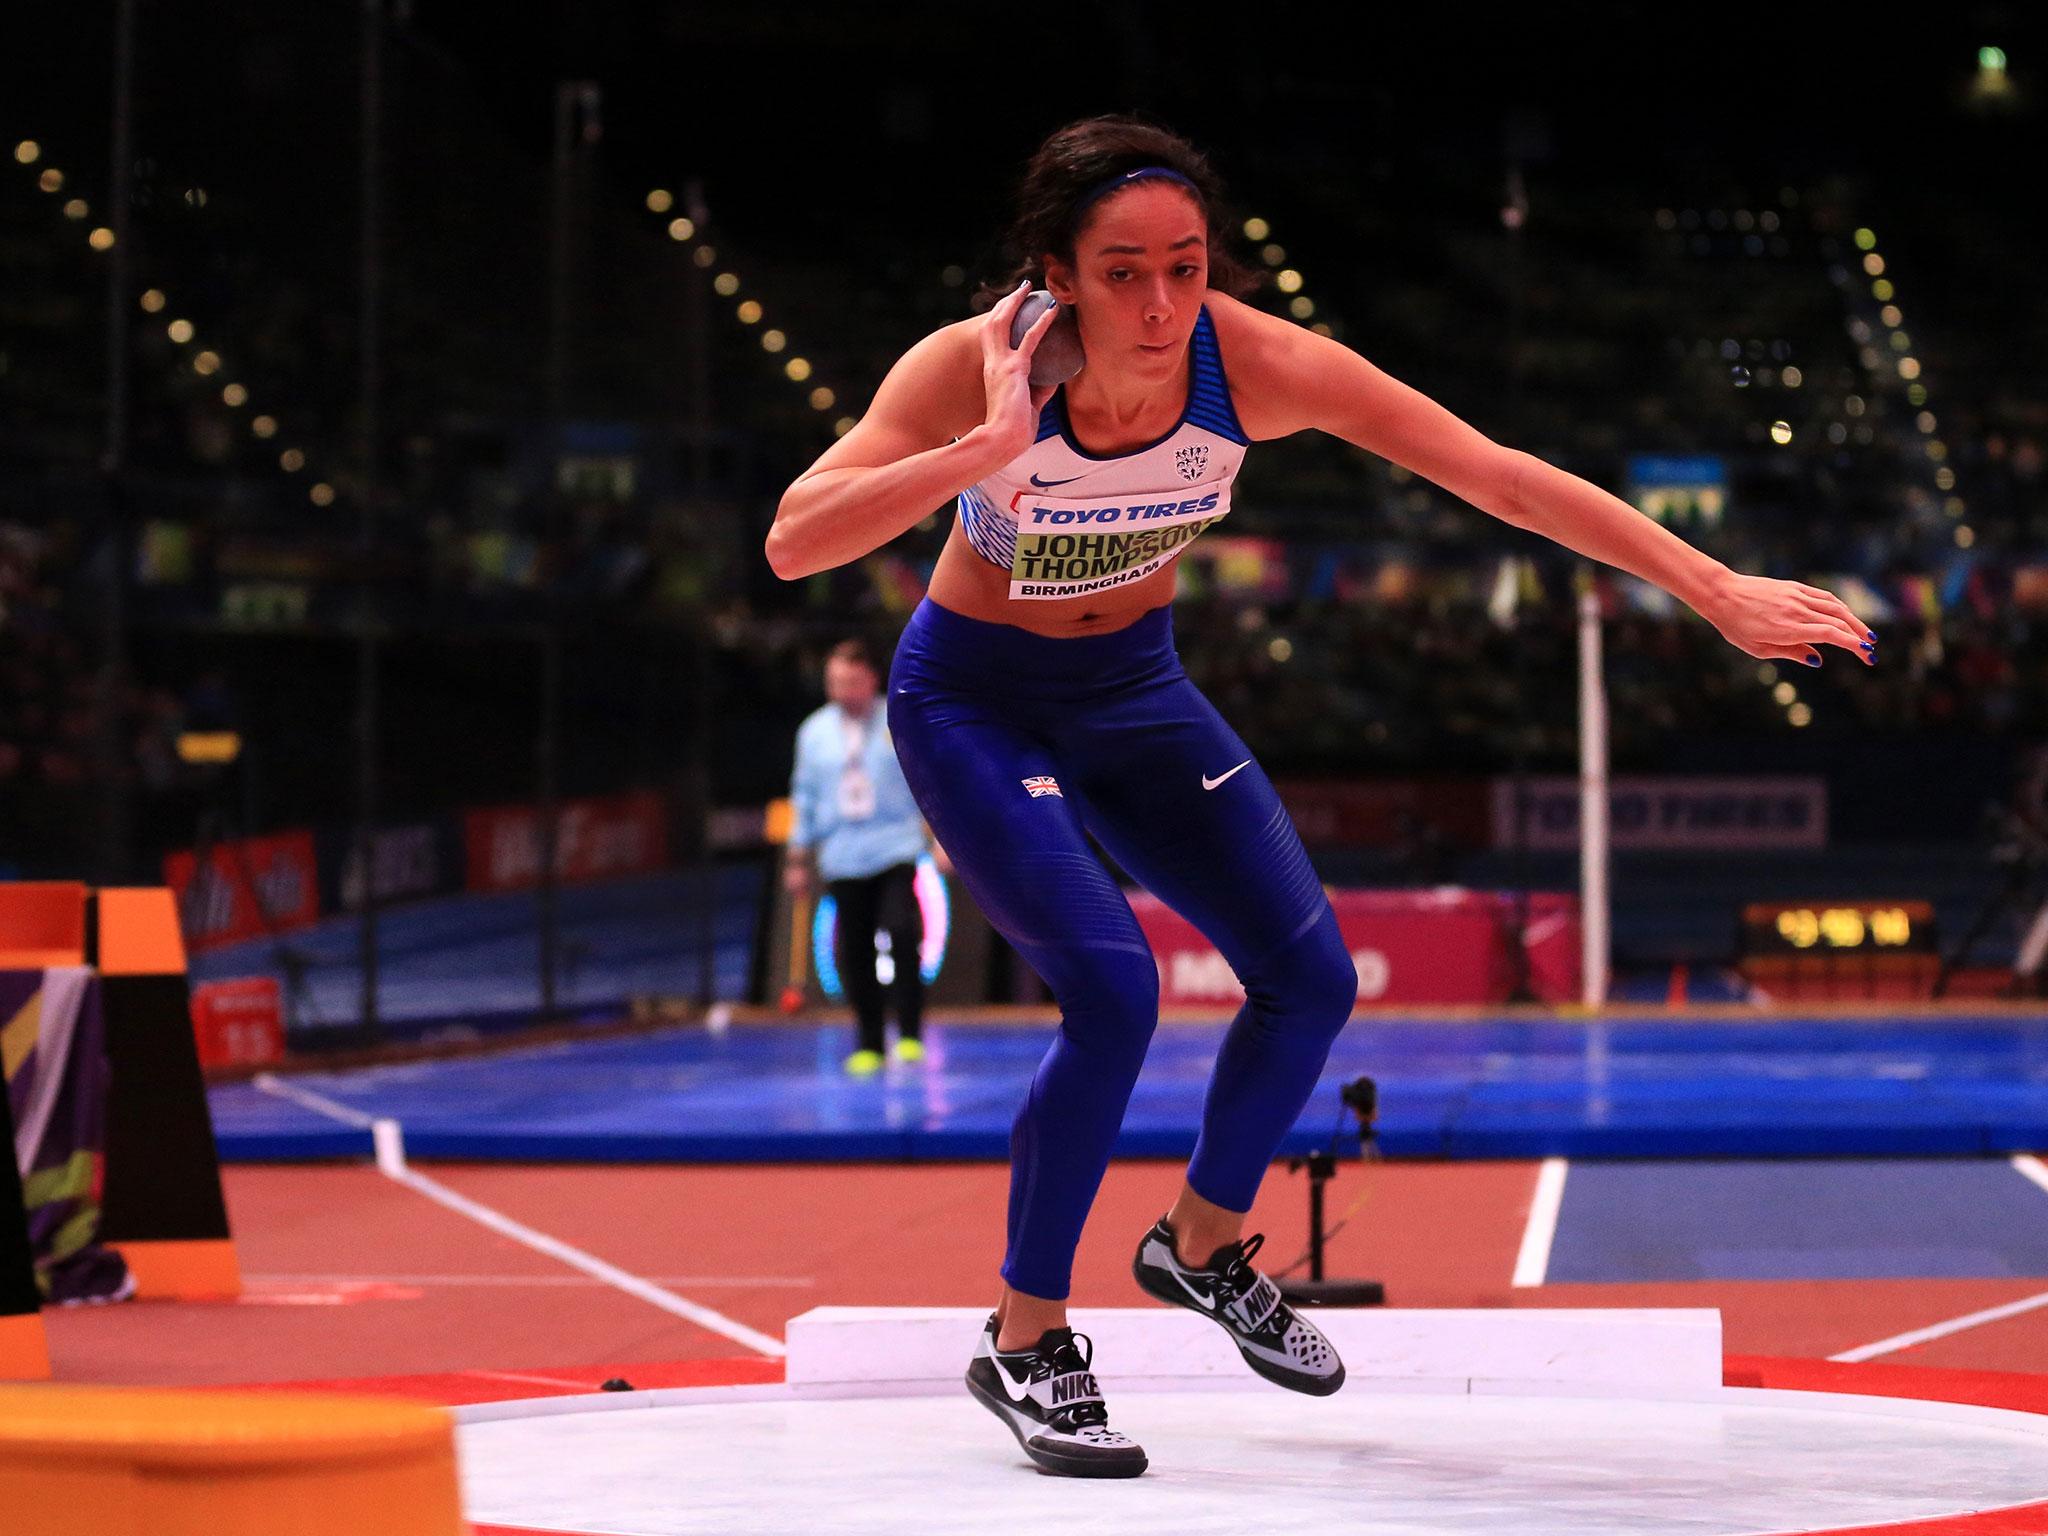 Johnson-Thompson recorded a lifetime best of 12.68m in the shot